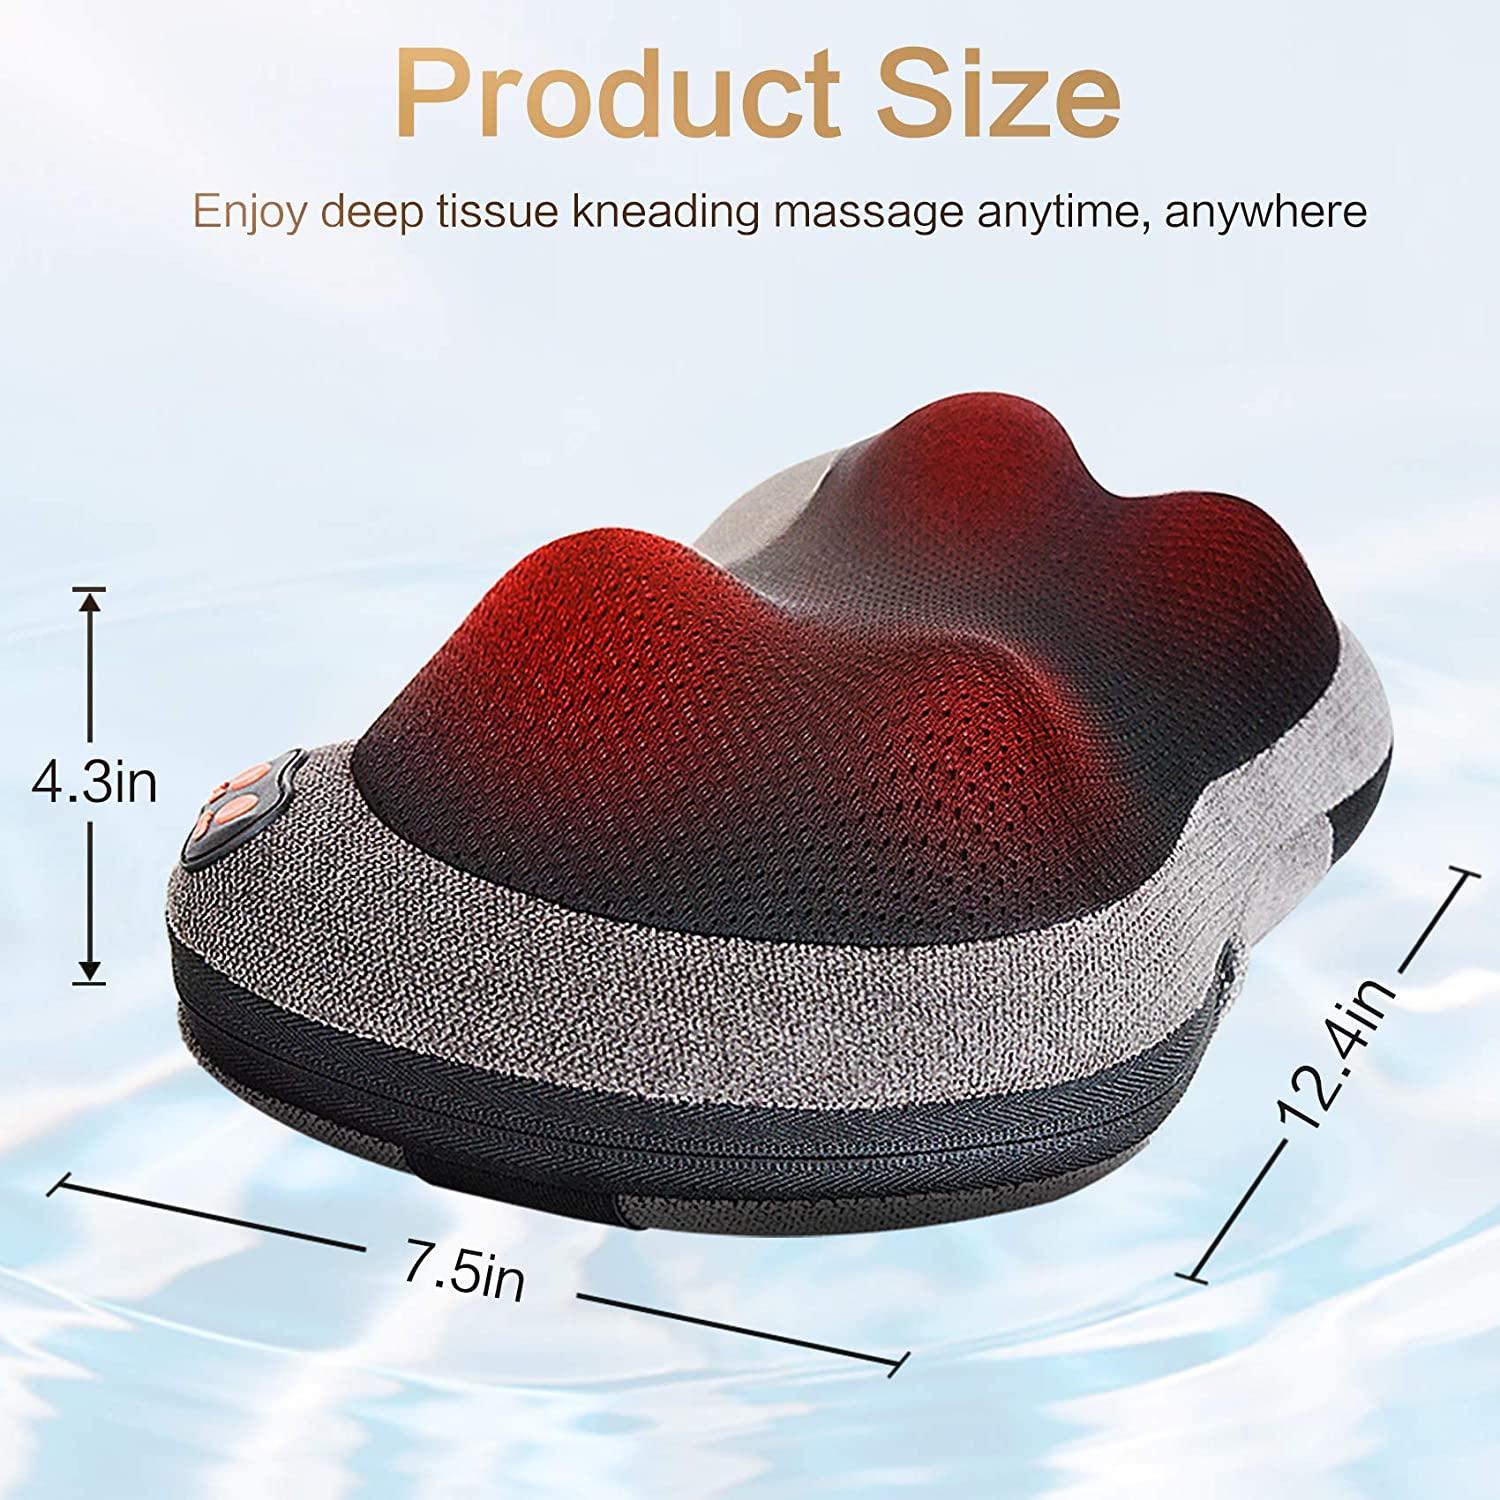 Electric Massage Mat Health Care Relax Body Cushion Neck Pillow